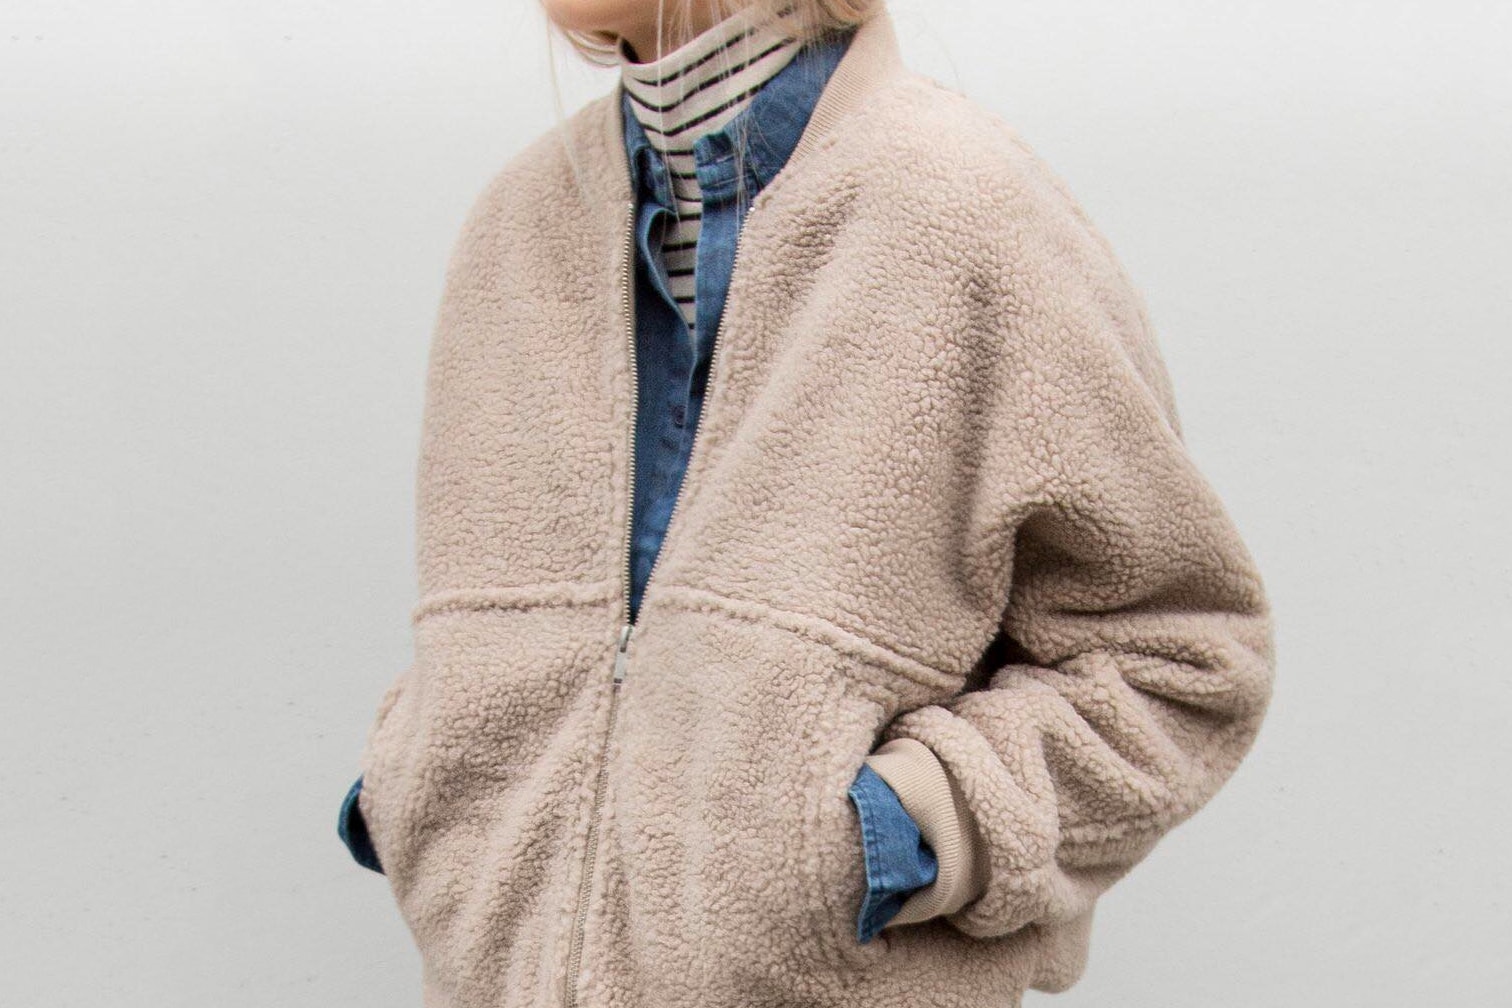 OAK + FORT Mix Match Outerwear Sale Discount 40 Percent Off In Store Online Vancouver Jackets Bomber Coat Winter Fall Cardigan Wool Knit Teddy Bear Fluffy Furry Minimalist